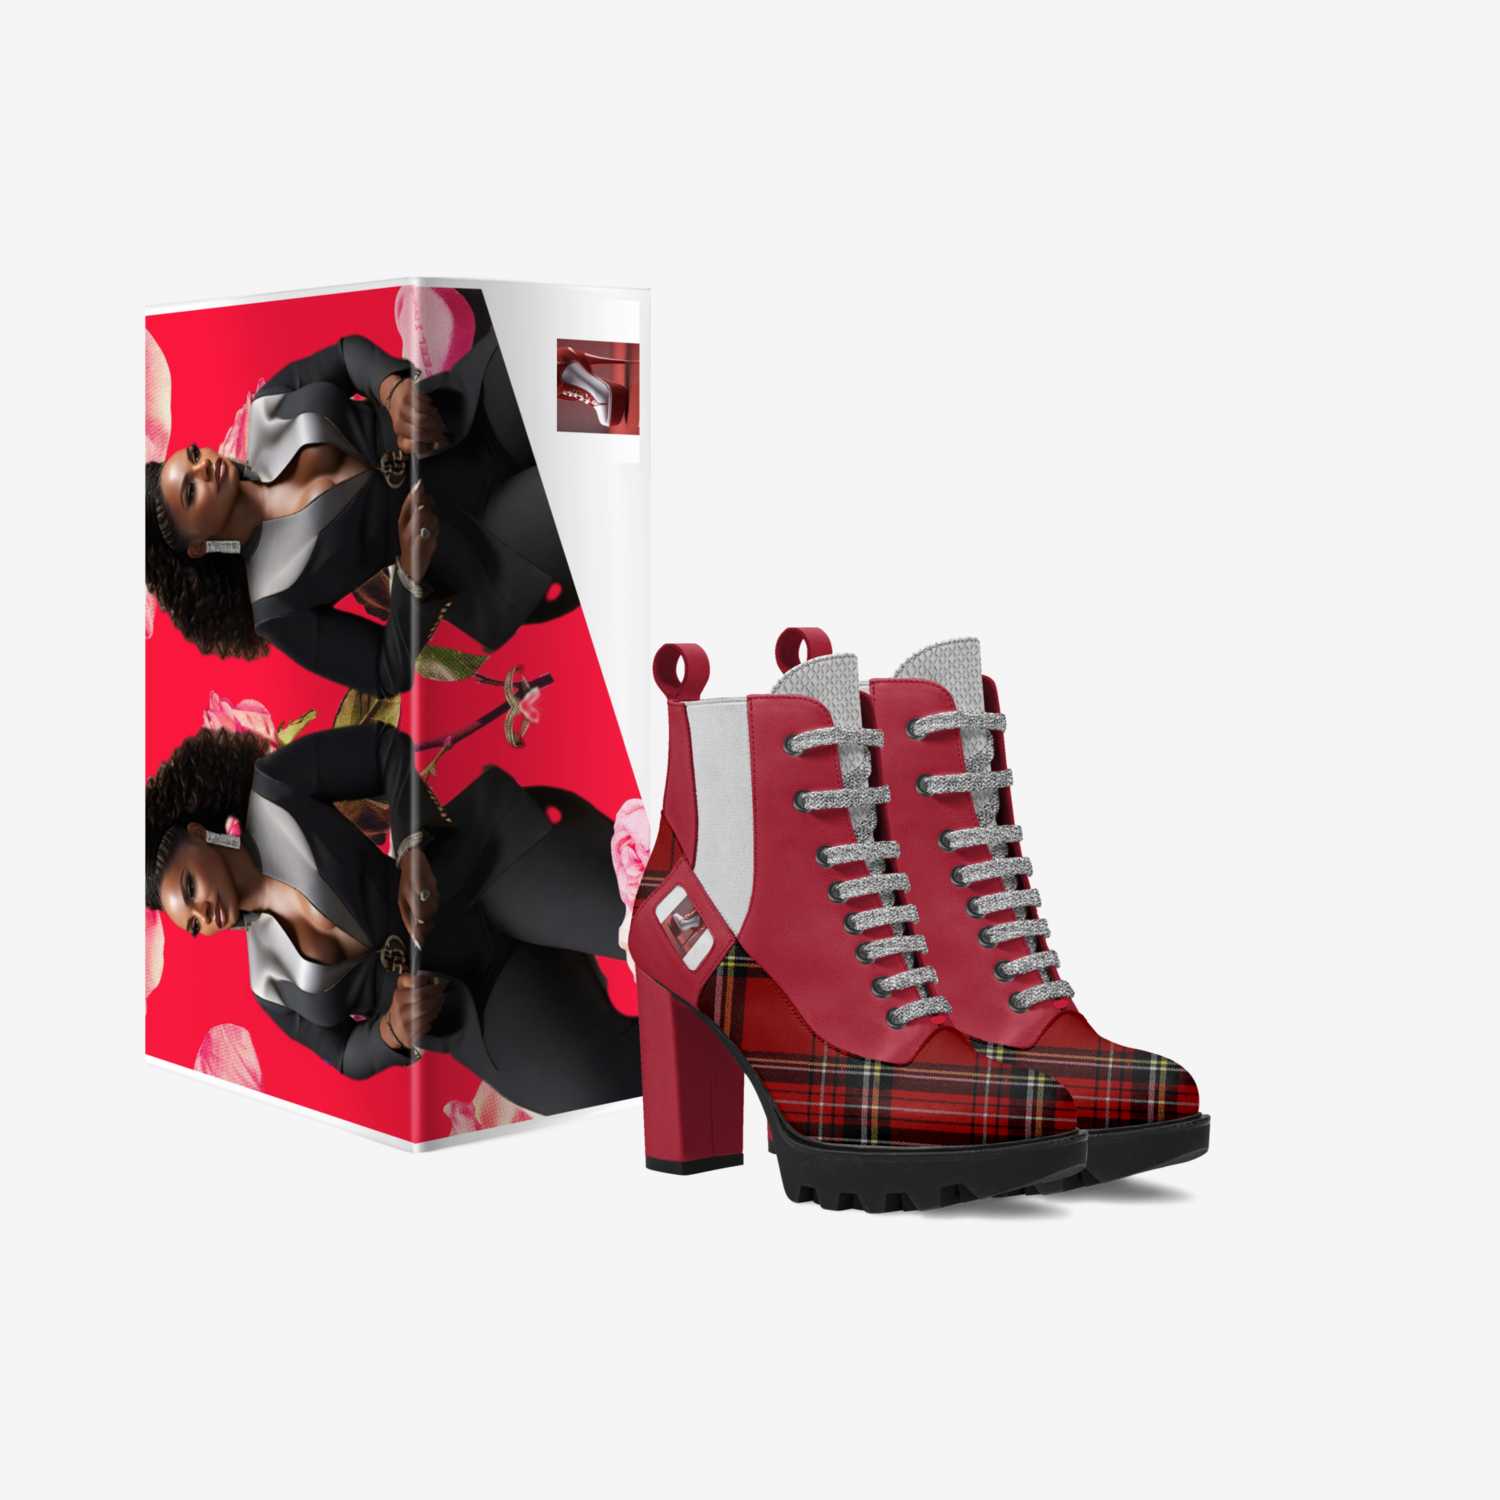 Red Fierce custom made in Italy shoes by Desiree Sims | Box view